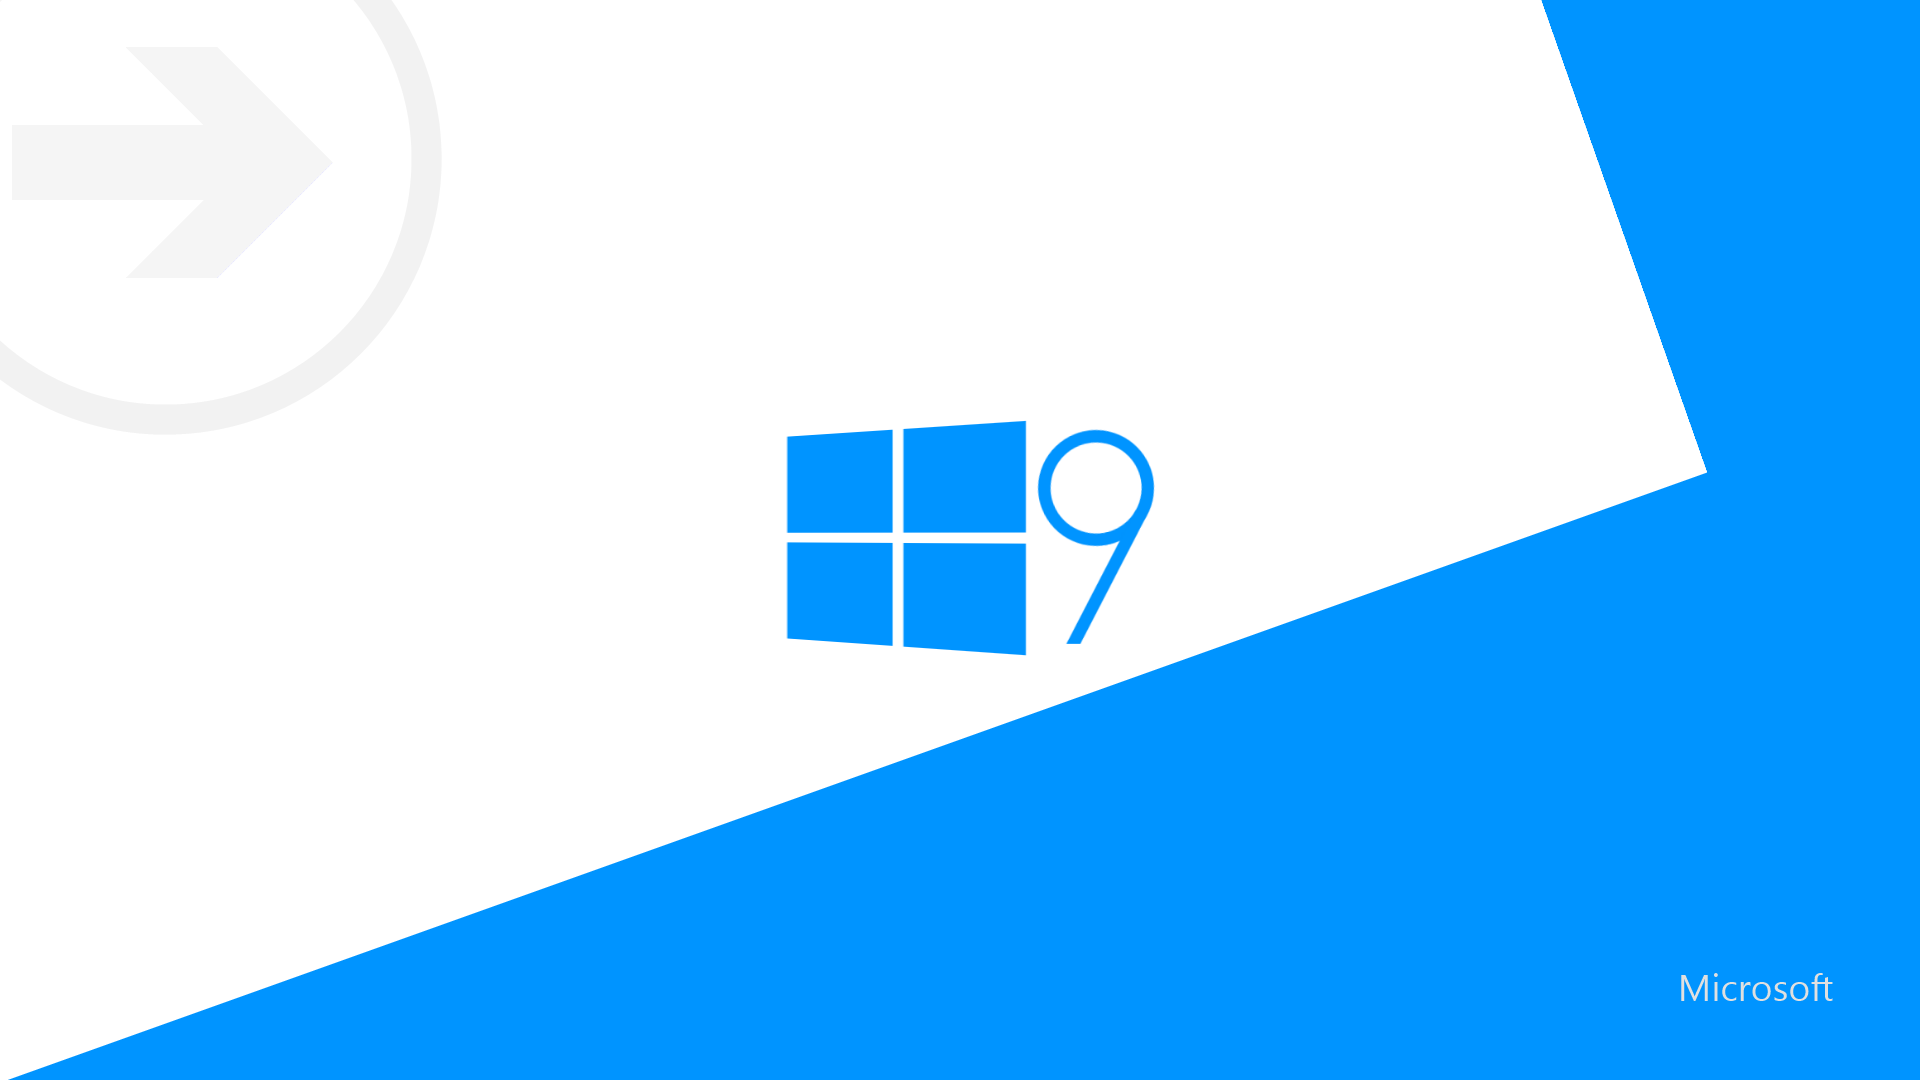 Windows 9 to be released in 2015 – here’s what we know